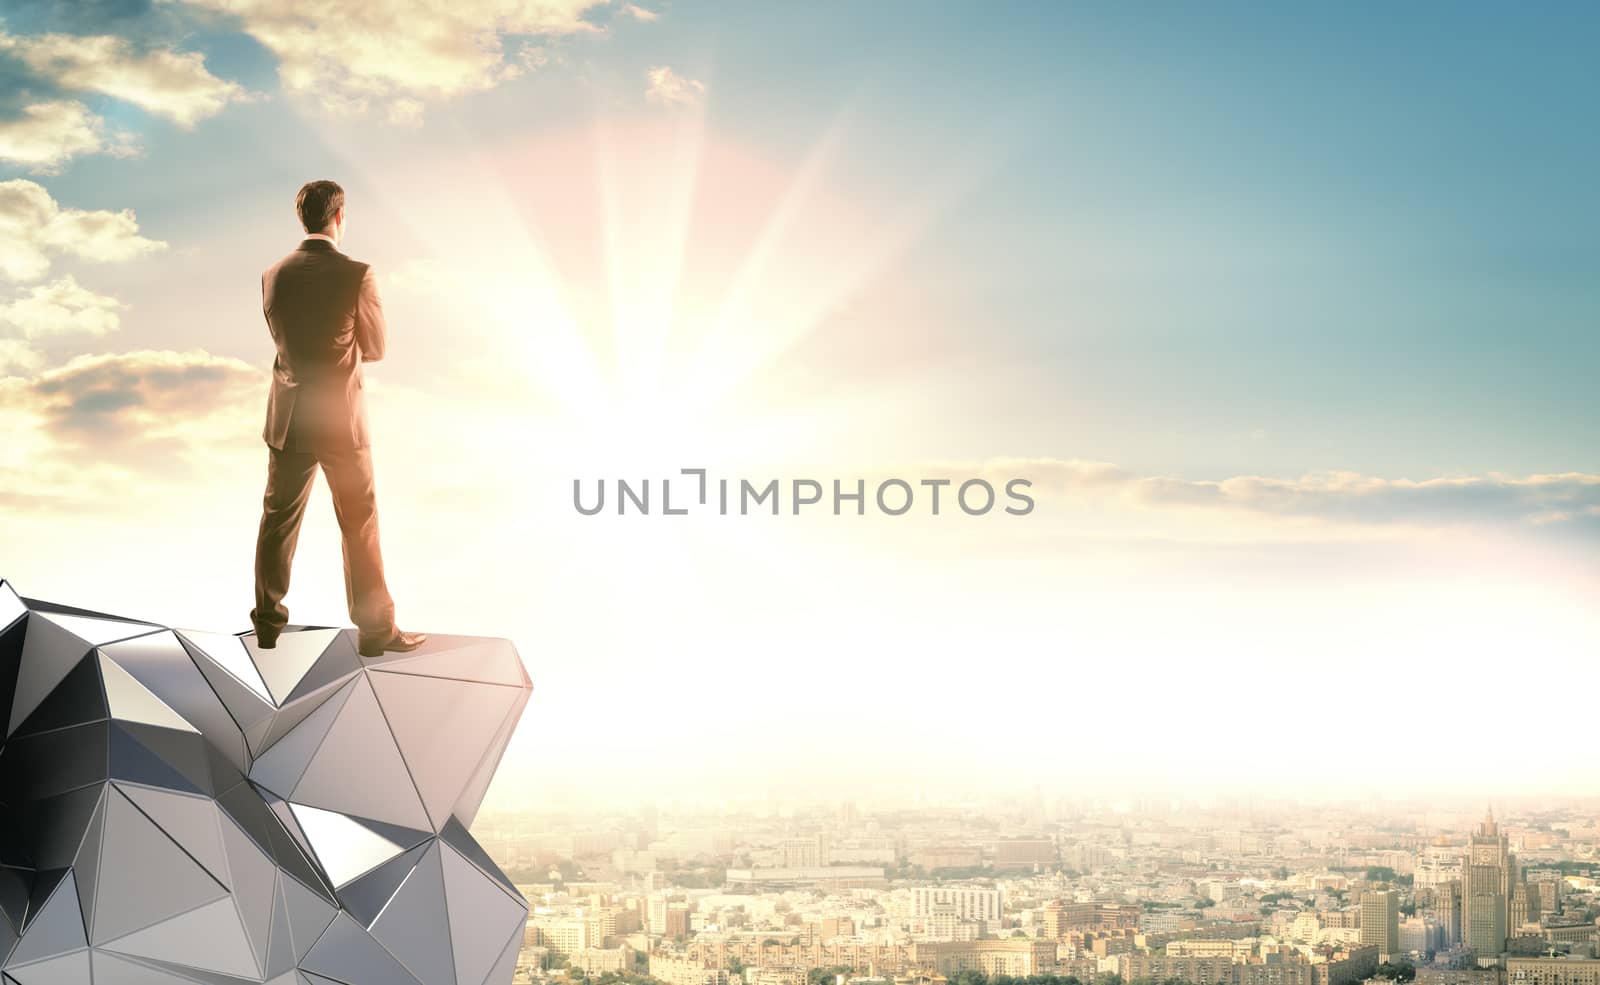 A businessman in a suit stands on an abstract metal construction and looks at the sunrise. Ahead of city landscape